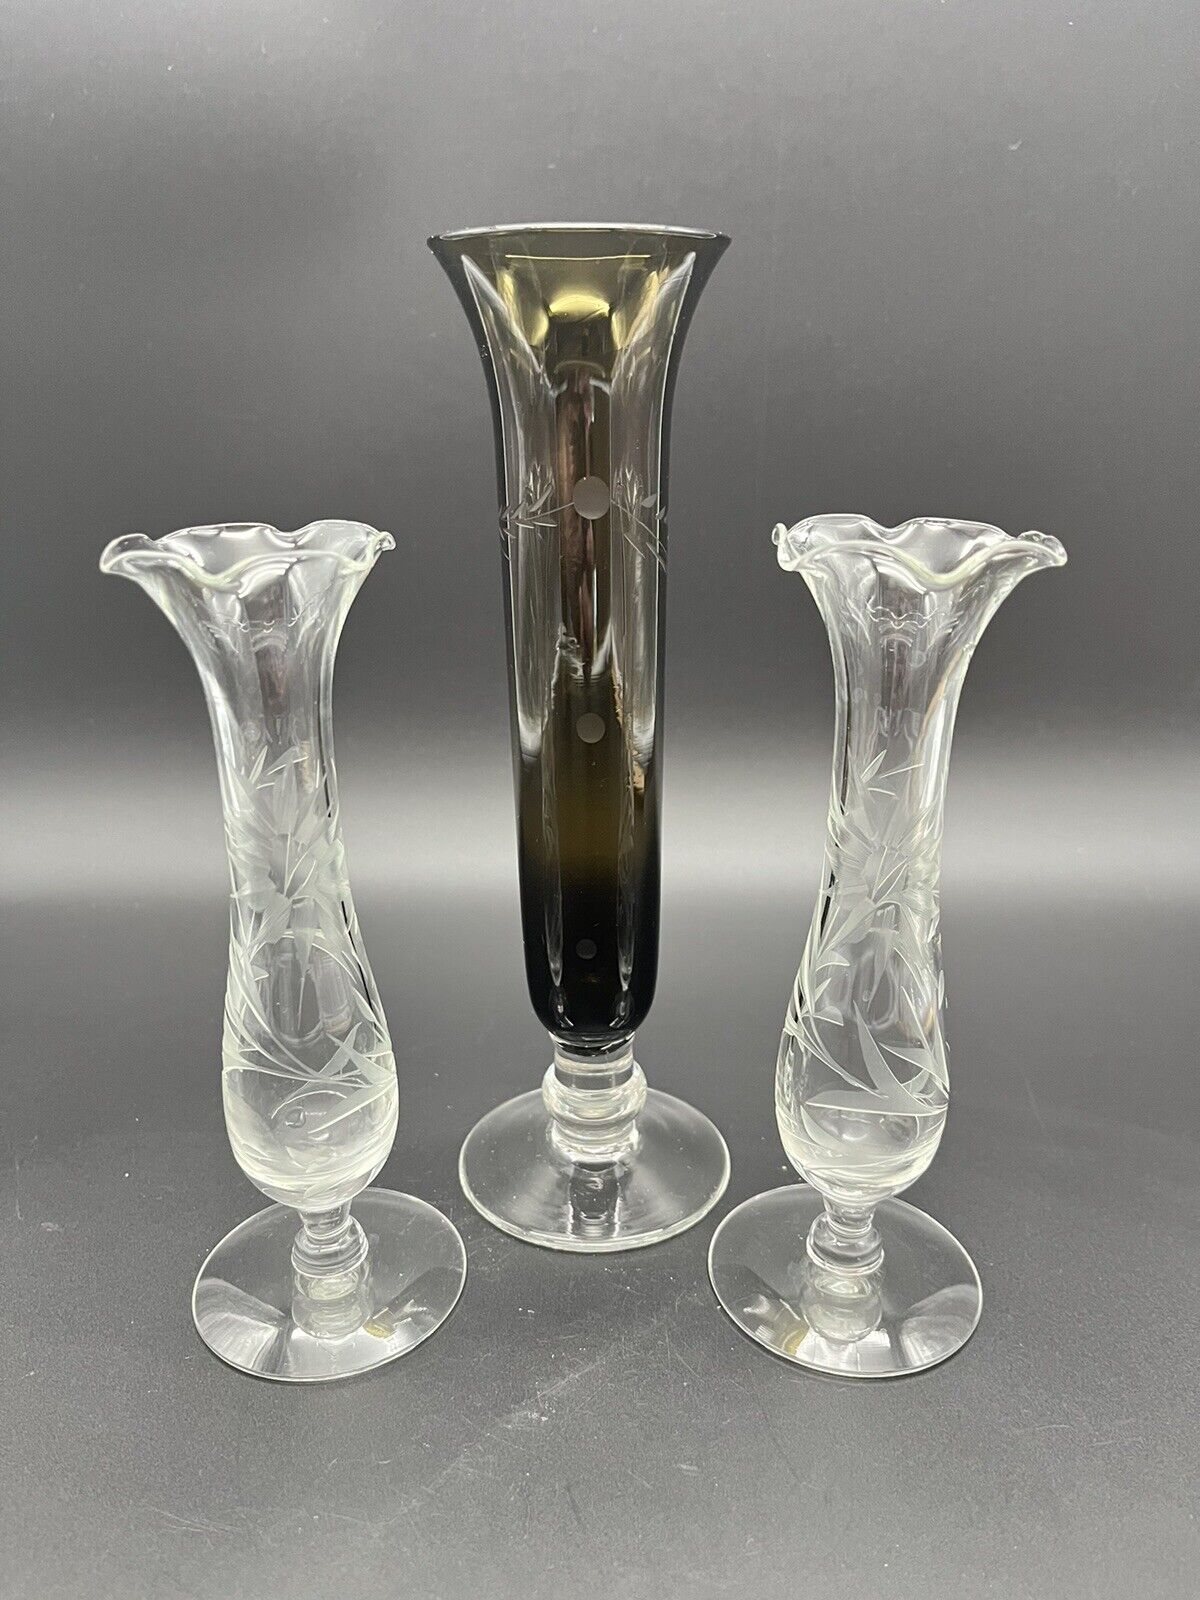 Vintage Lot Of 3 Bud Vases Charcoal And Clear Varying Sizes